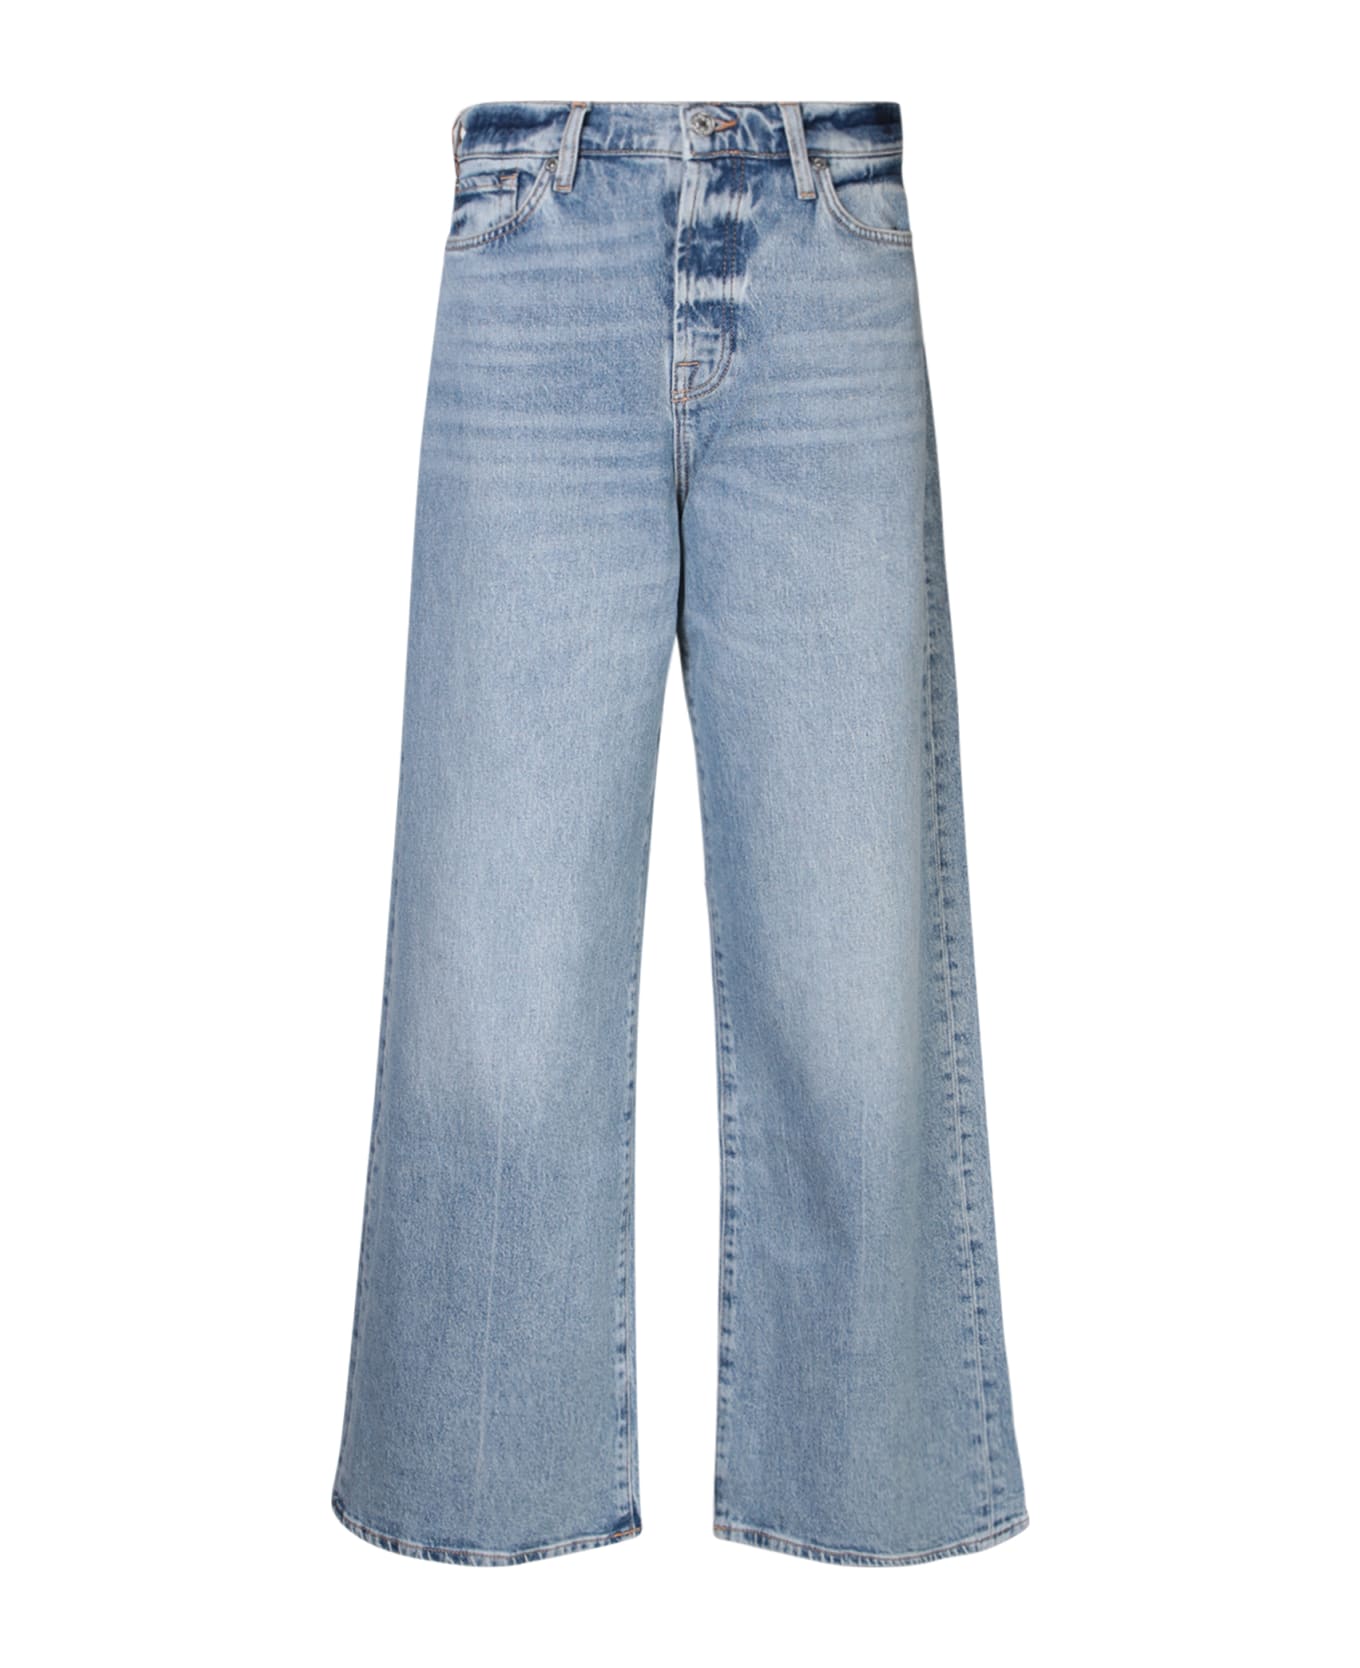 7 For All Mankind Zoey Wide Leg Light Blue Jeans - Blue デニム